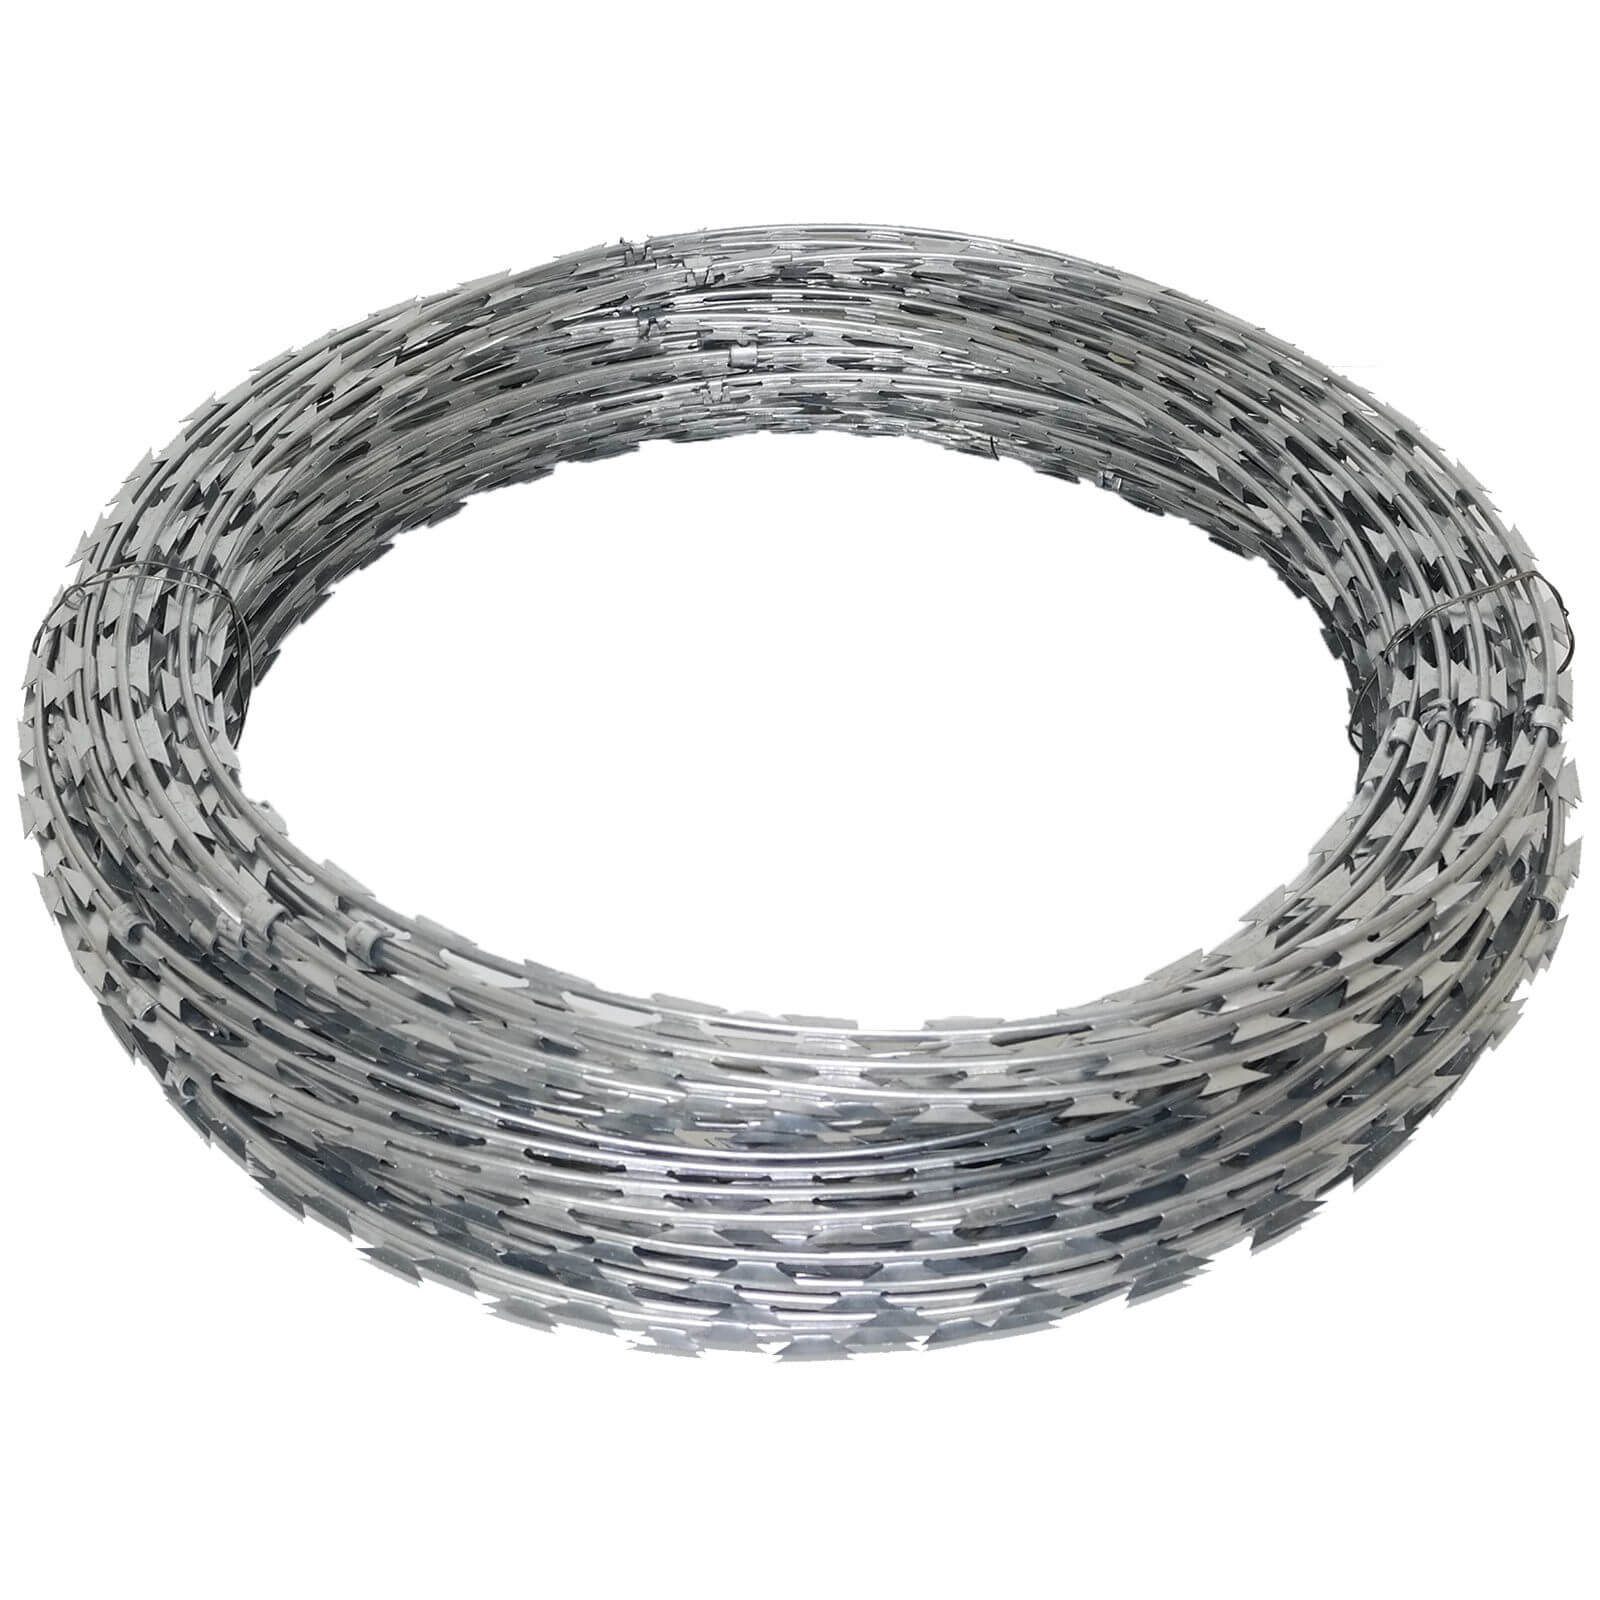 Razor wire fencing: Enhancing Security with Razor Wire Fence